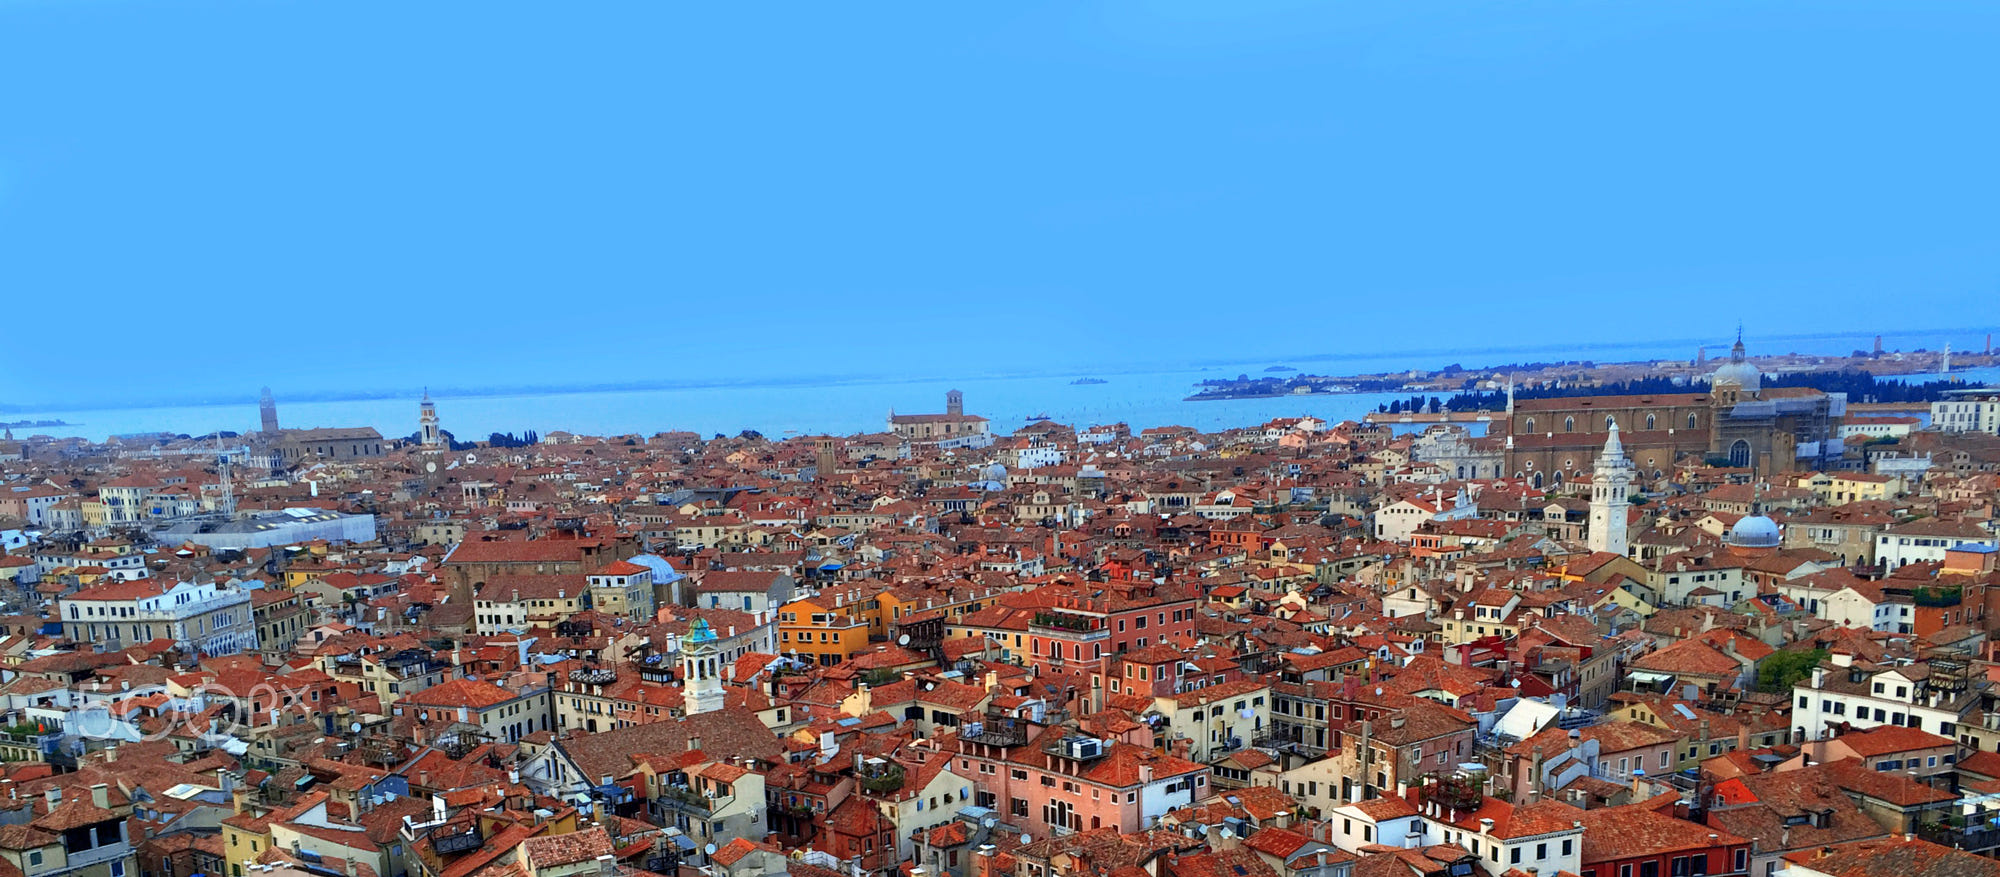 photography, Cityscape, House, Sky, Sea, Town, Old building, Ports, Venice, Italy Wallpaper